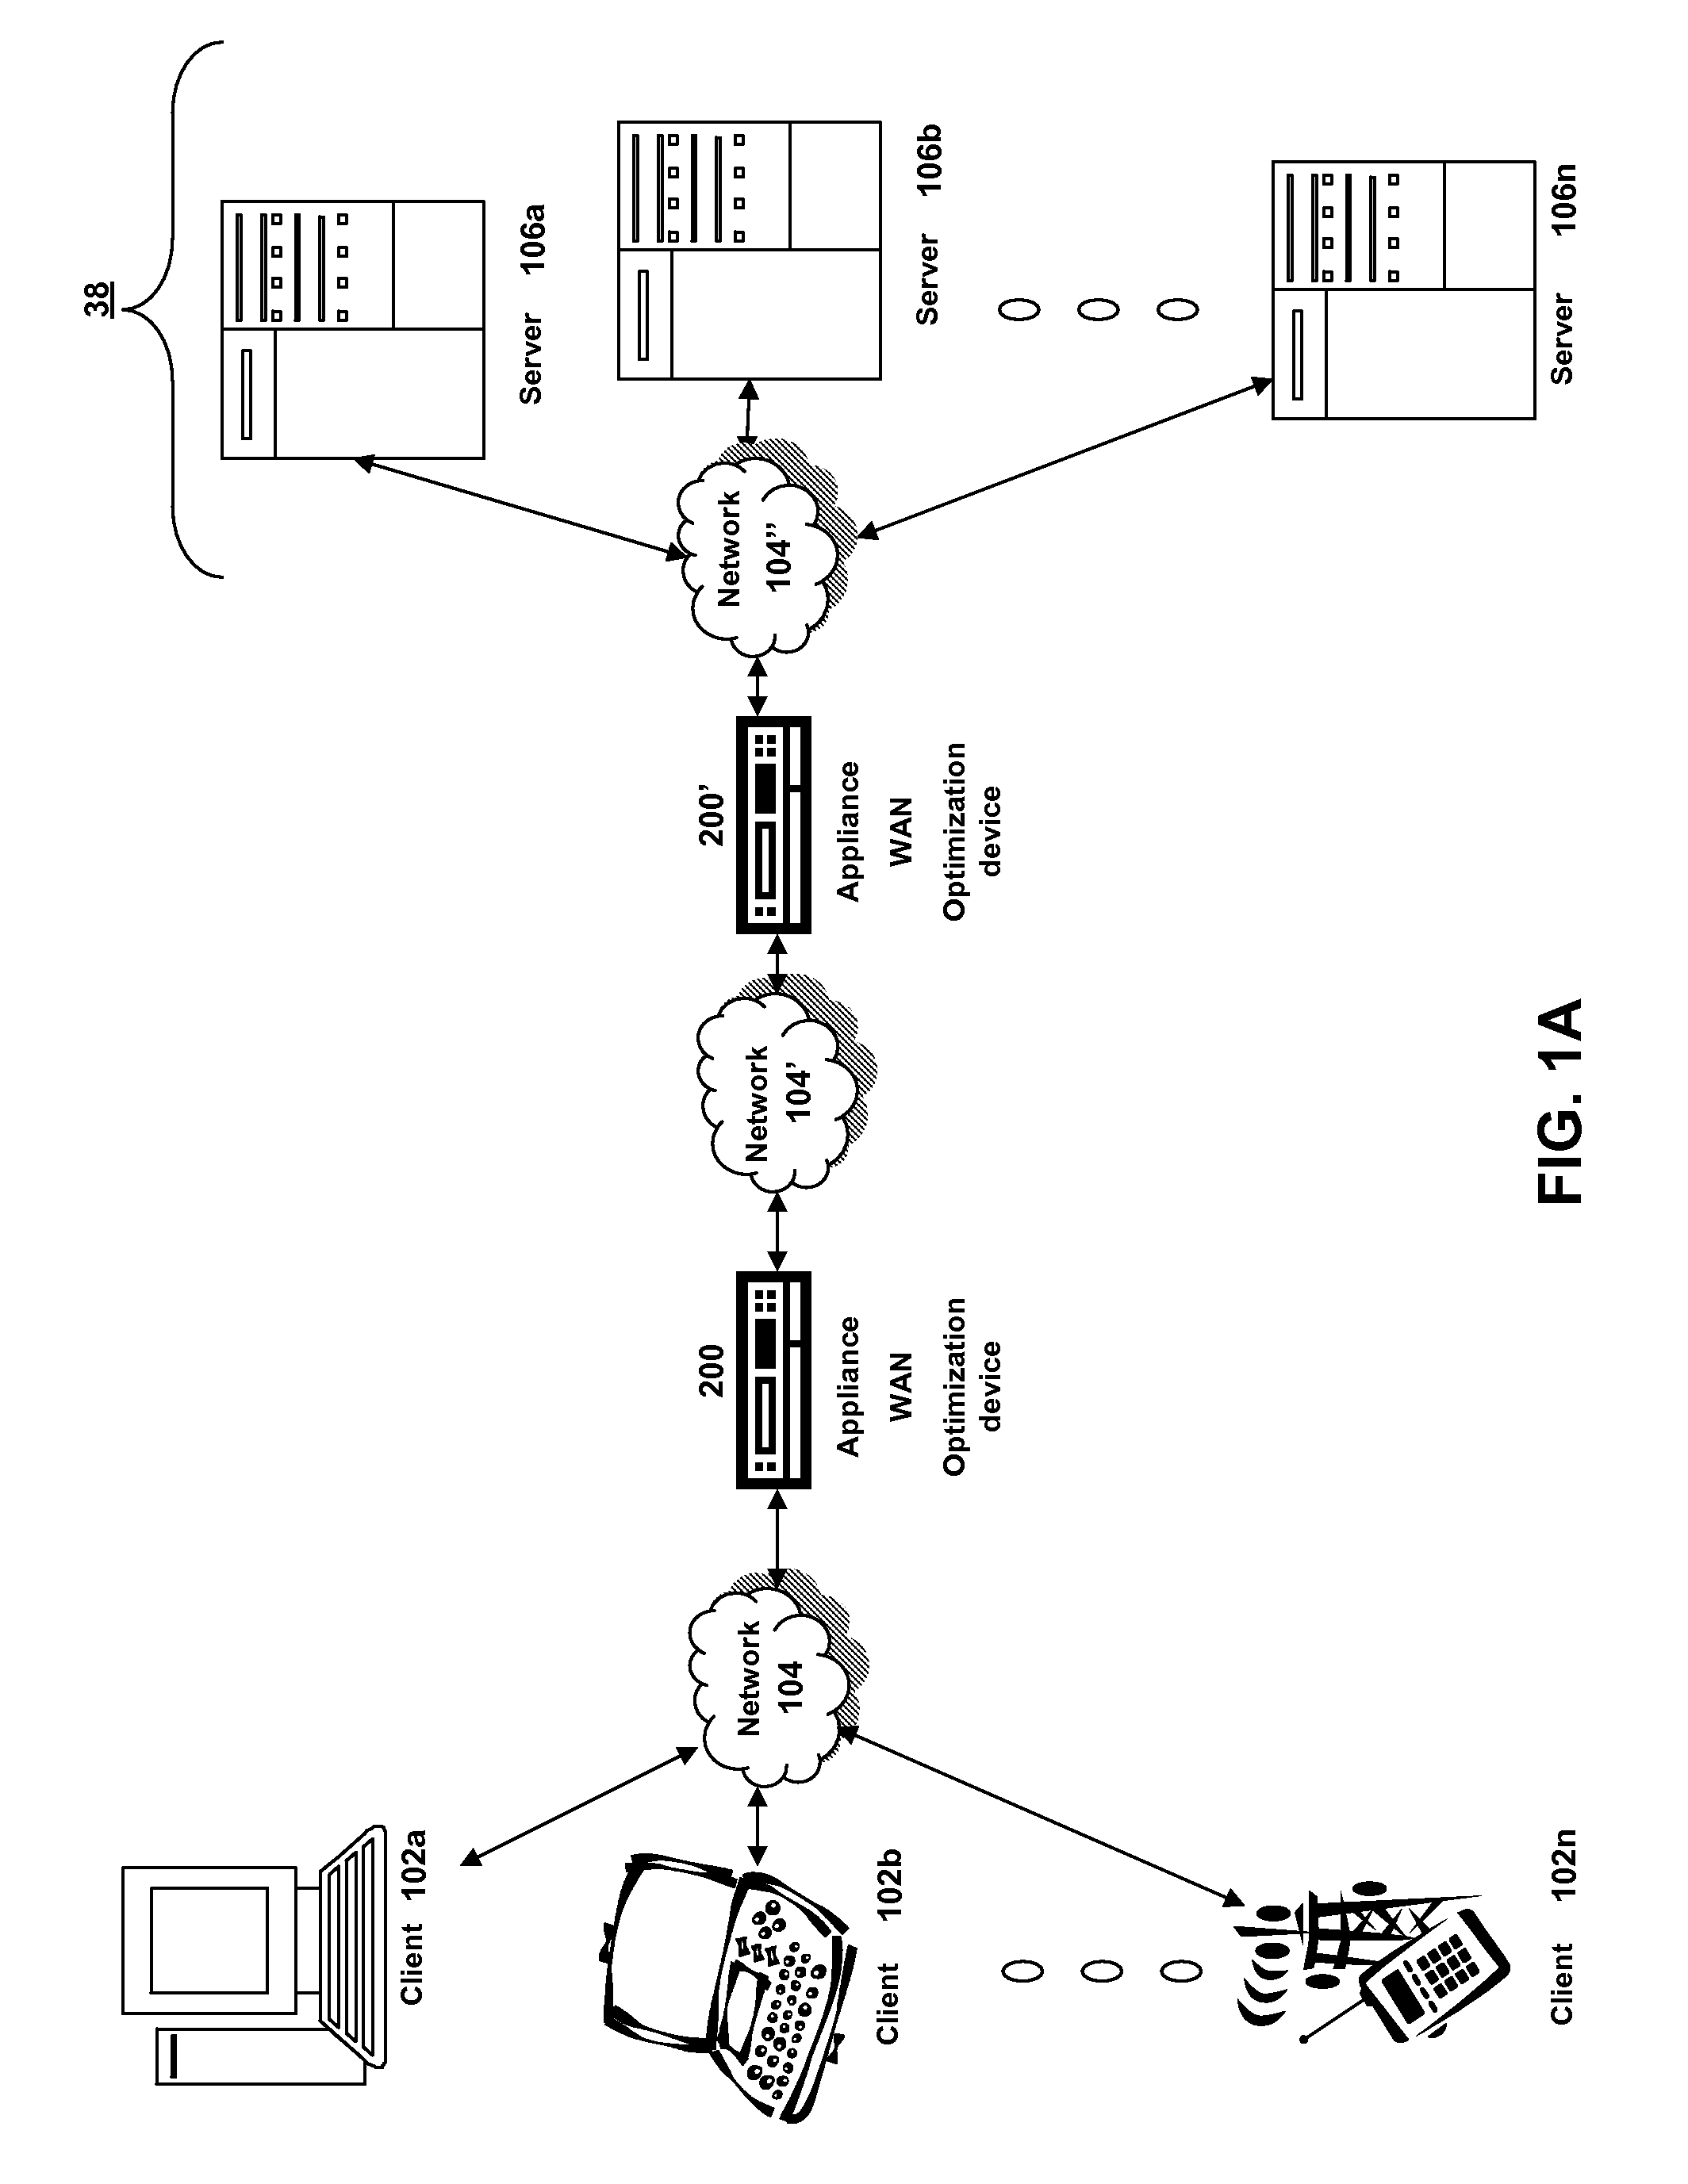 Systems and Methods of Providing Security and Reliability to Proxy Caches